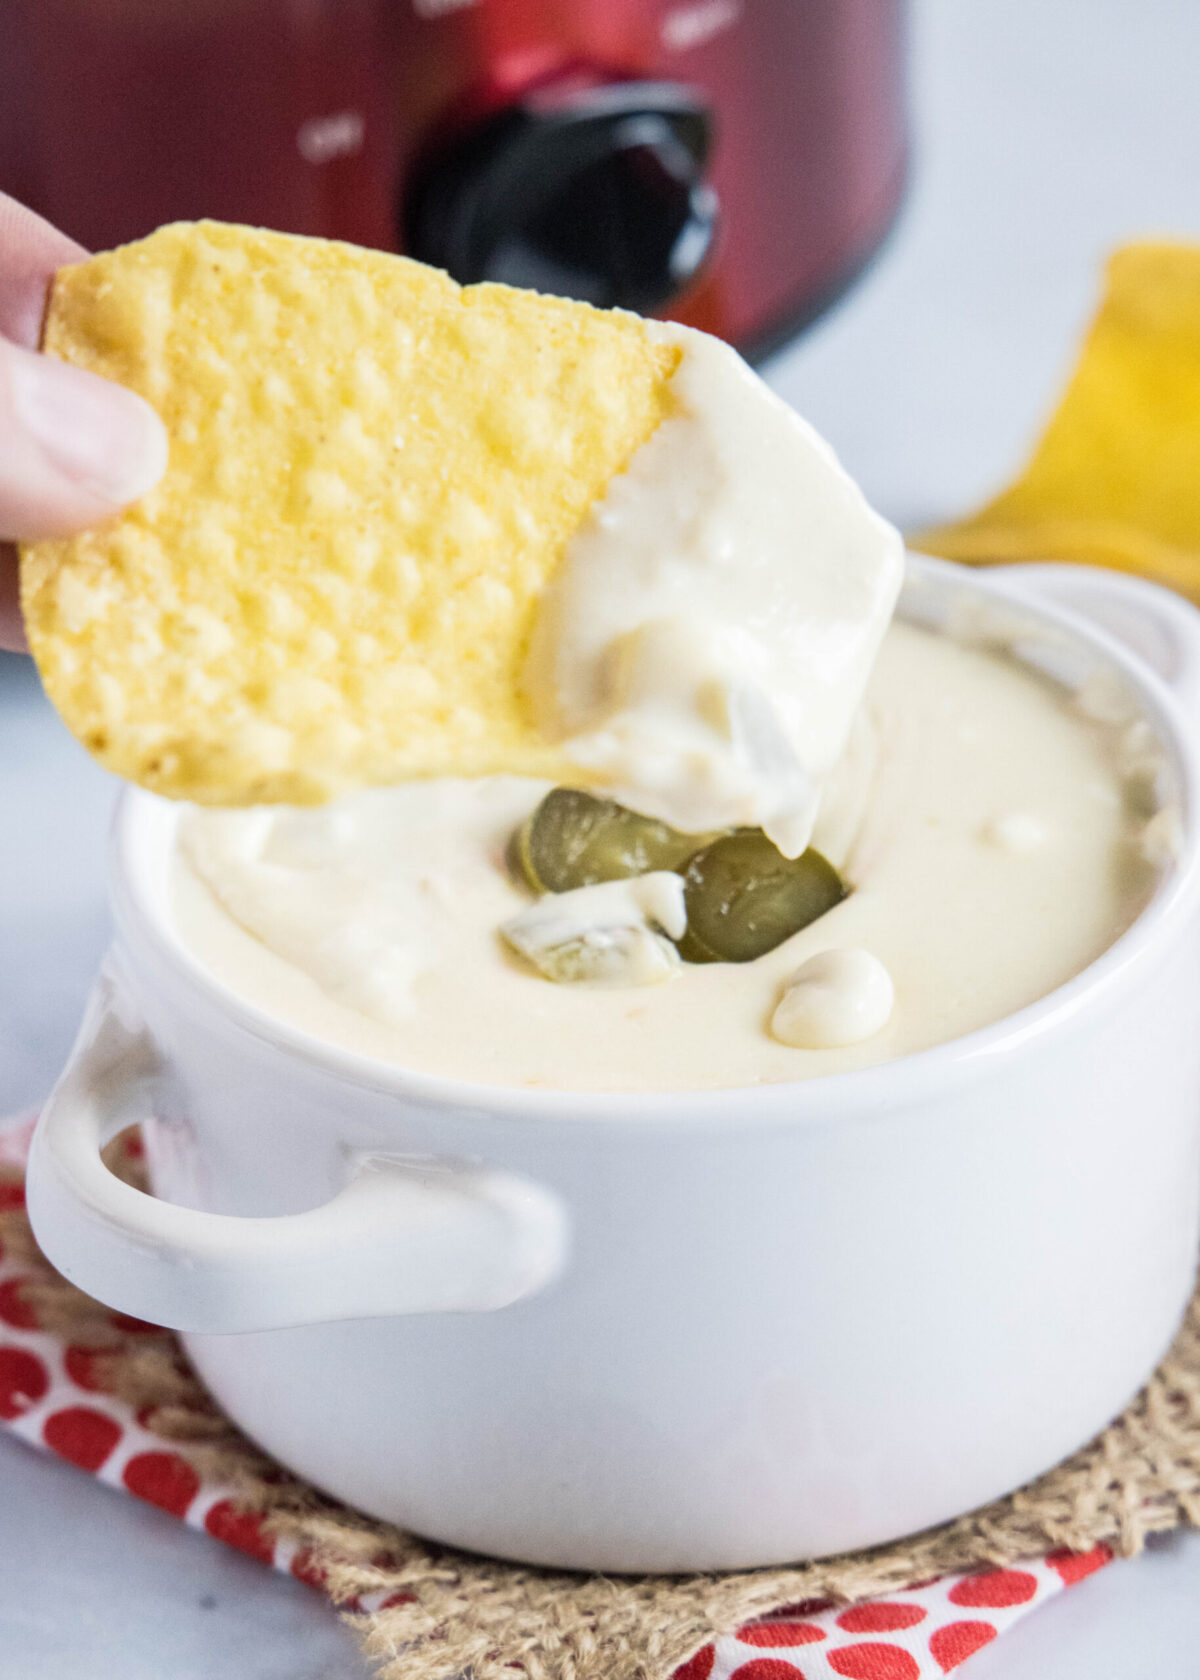 A hand pulling a chip out of a bowl of white queso dip